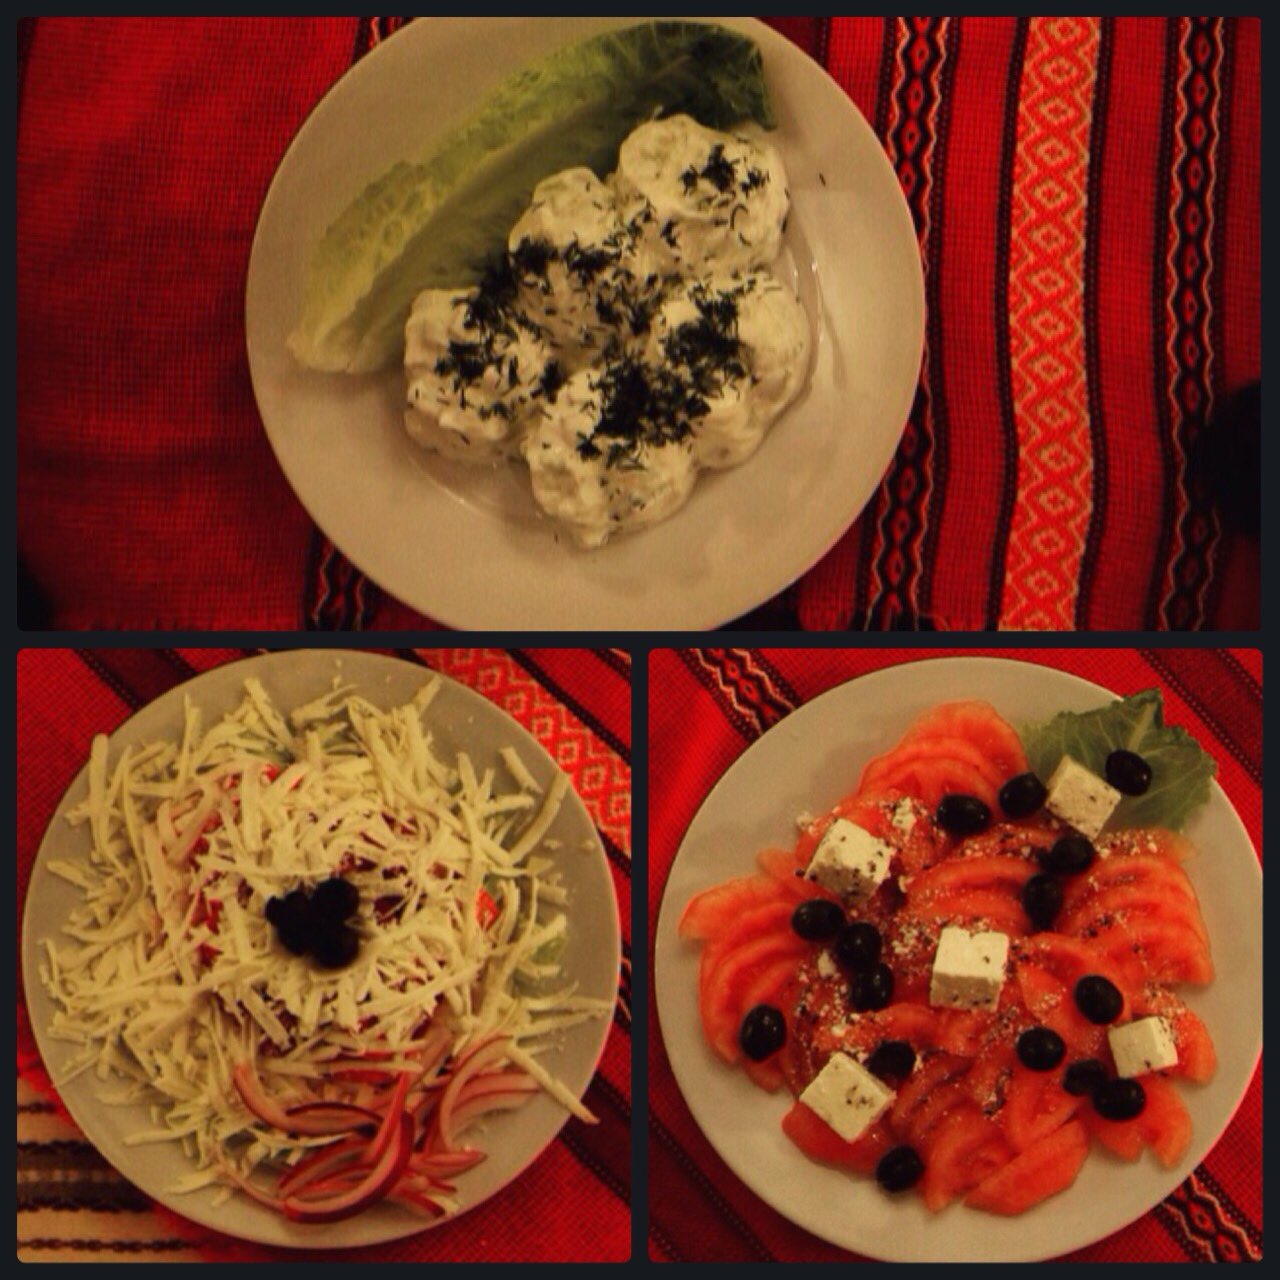 Top: Snejanka made with yogurt, cucumbers and dill Left: Shopska salad made with tomatoes, cucumbers, onions, green peppers and feta cheese Right: Peeled tomatoes with feta cheese and olives Credit: Elitsa Grigorova